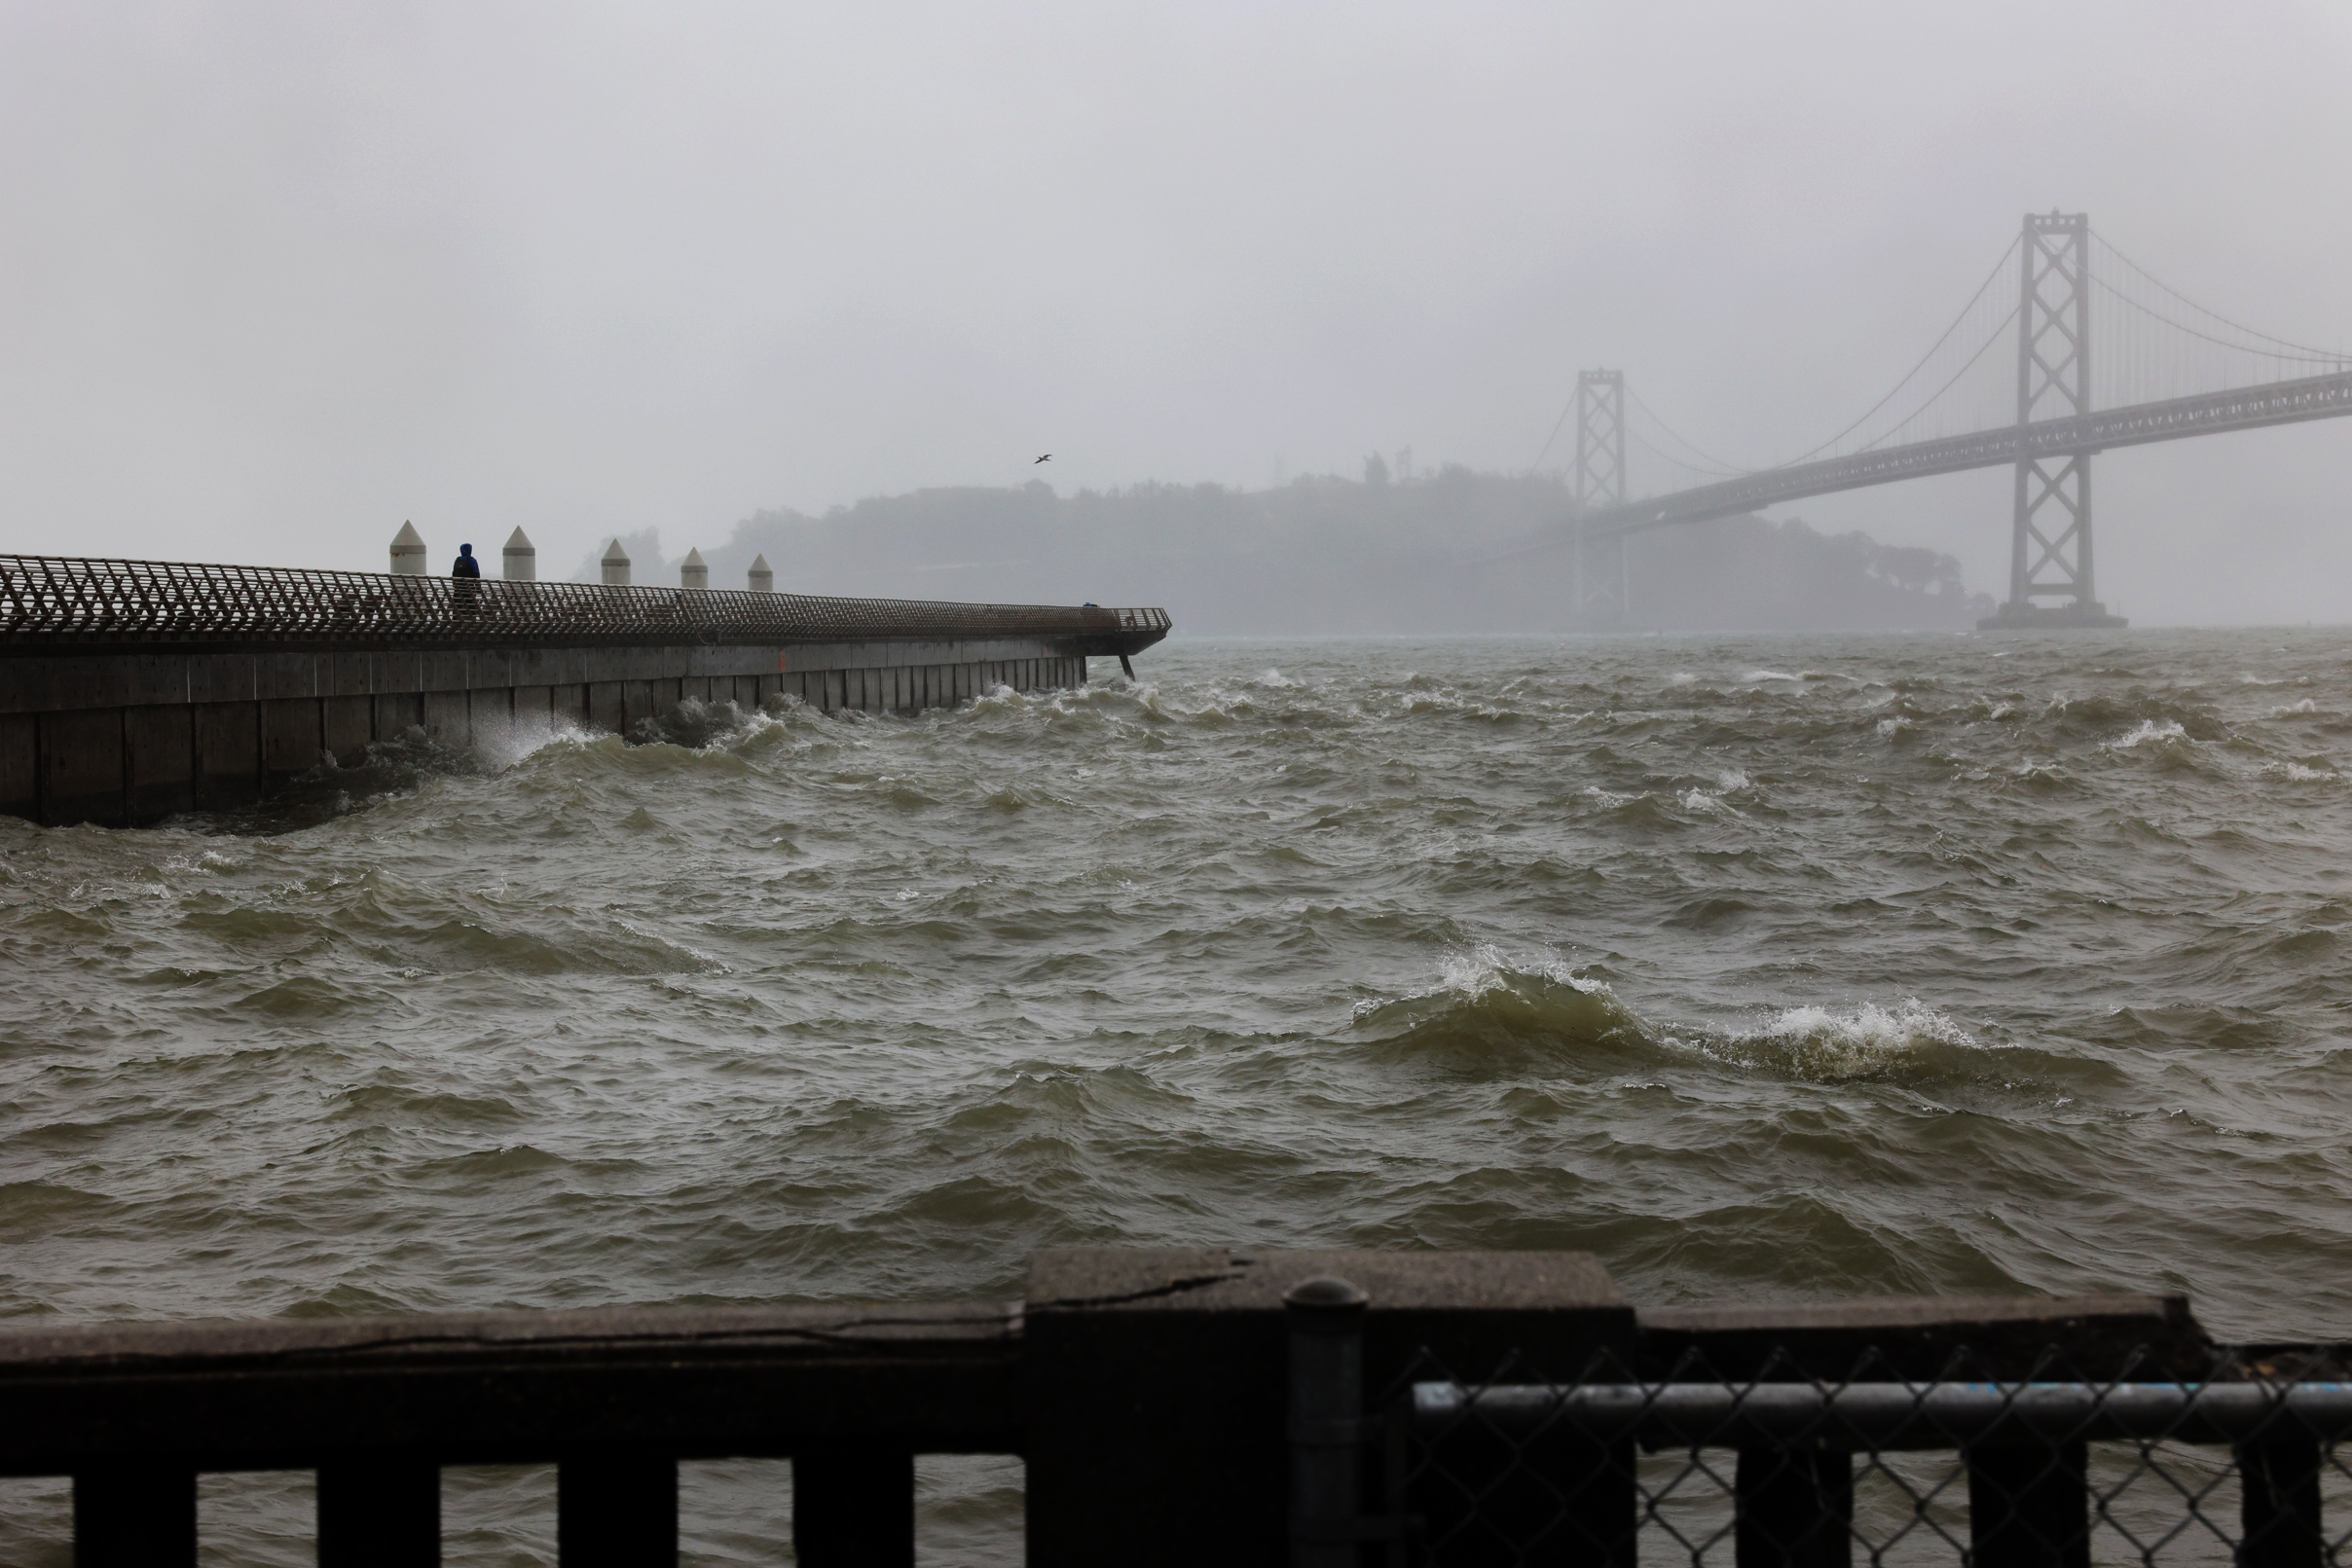 Choppy waters before a pier with a person; a bridge faintly looms in the misty background.